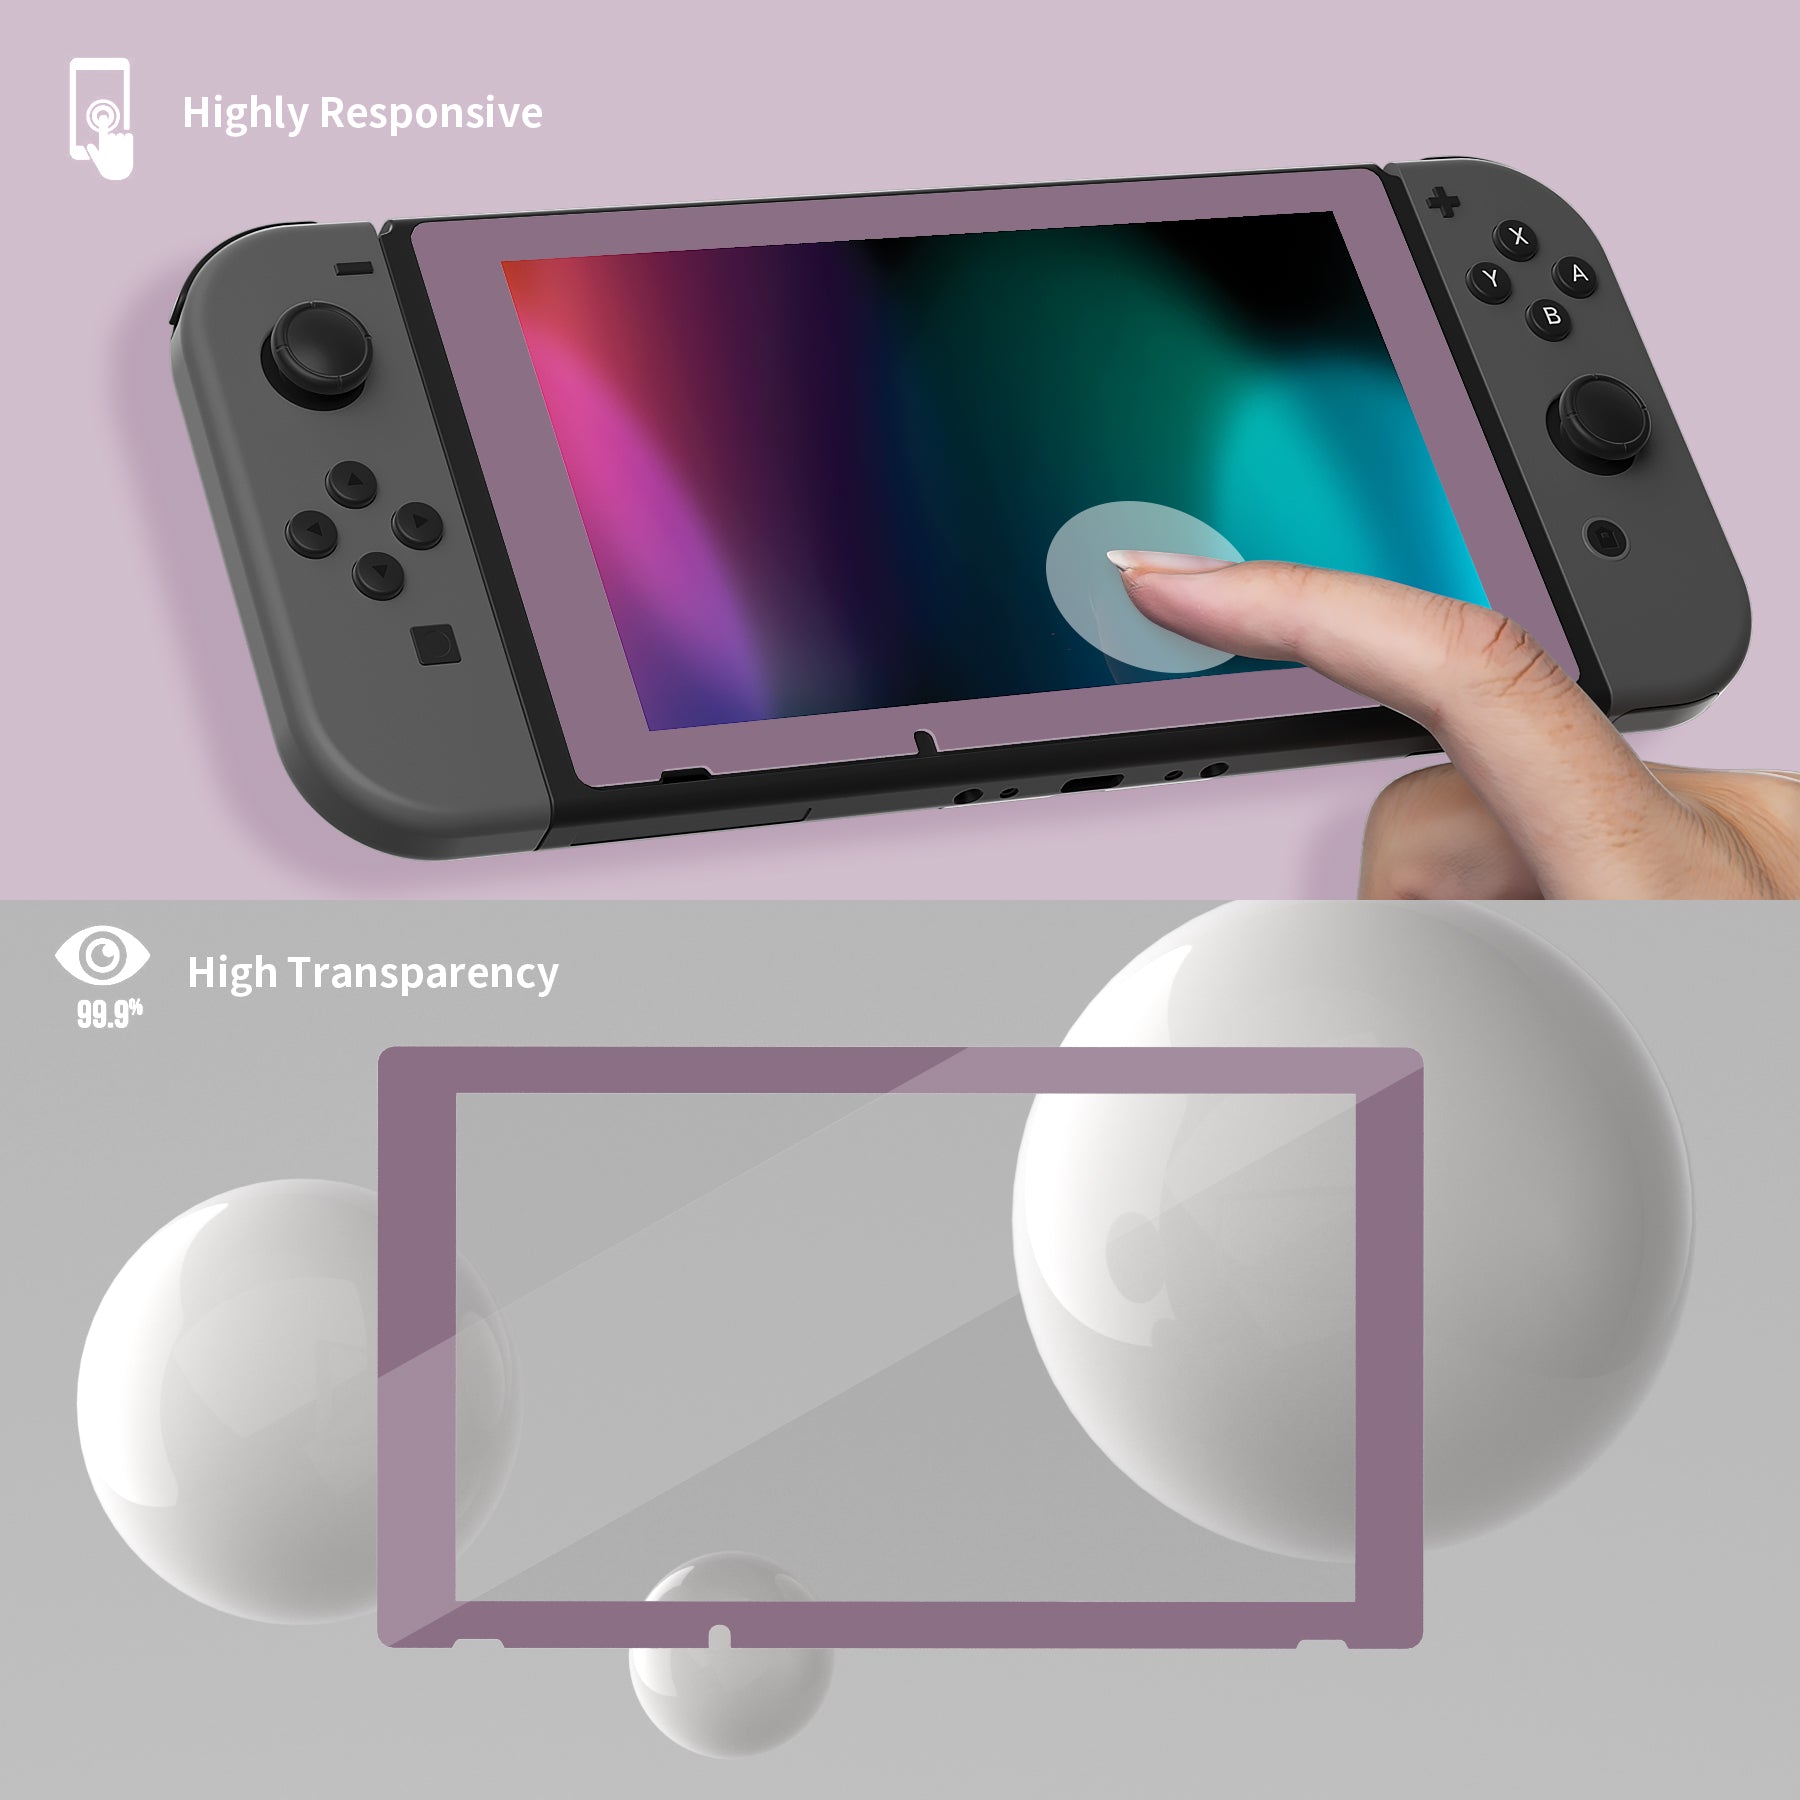 2 Pack Antique Dark Grayish Violet Transparent HD Clear Saver Protector Film, Tempered Glass Screen Protector for Nintendo Switch [Anti-Scratch, Anti-Fingerprint, Shatterproof, Bubble-Free] - NSPJ0711 playvital